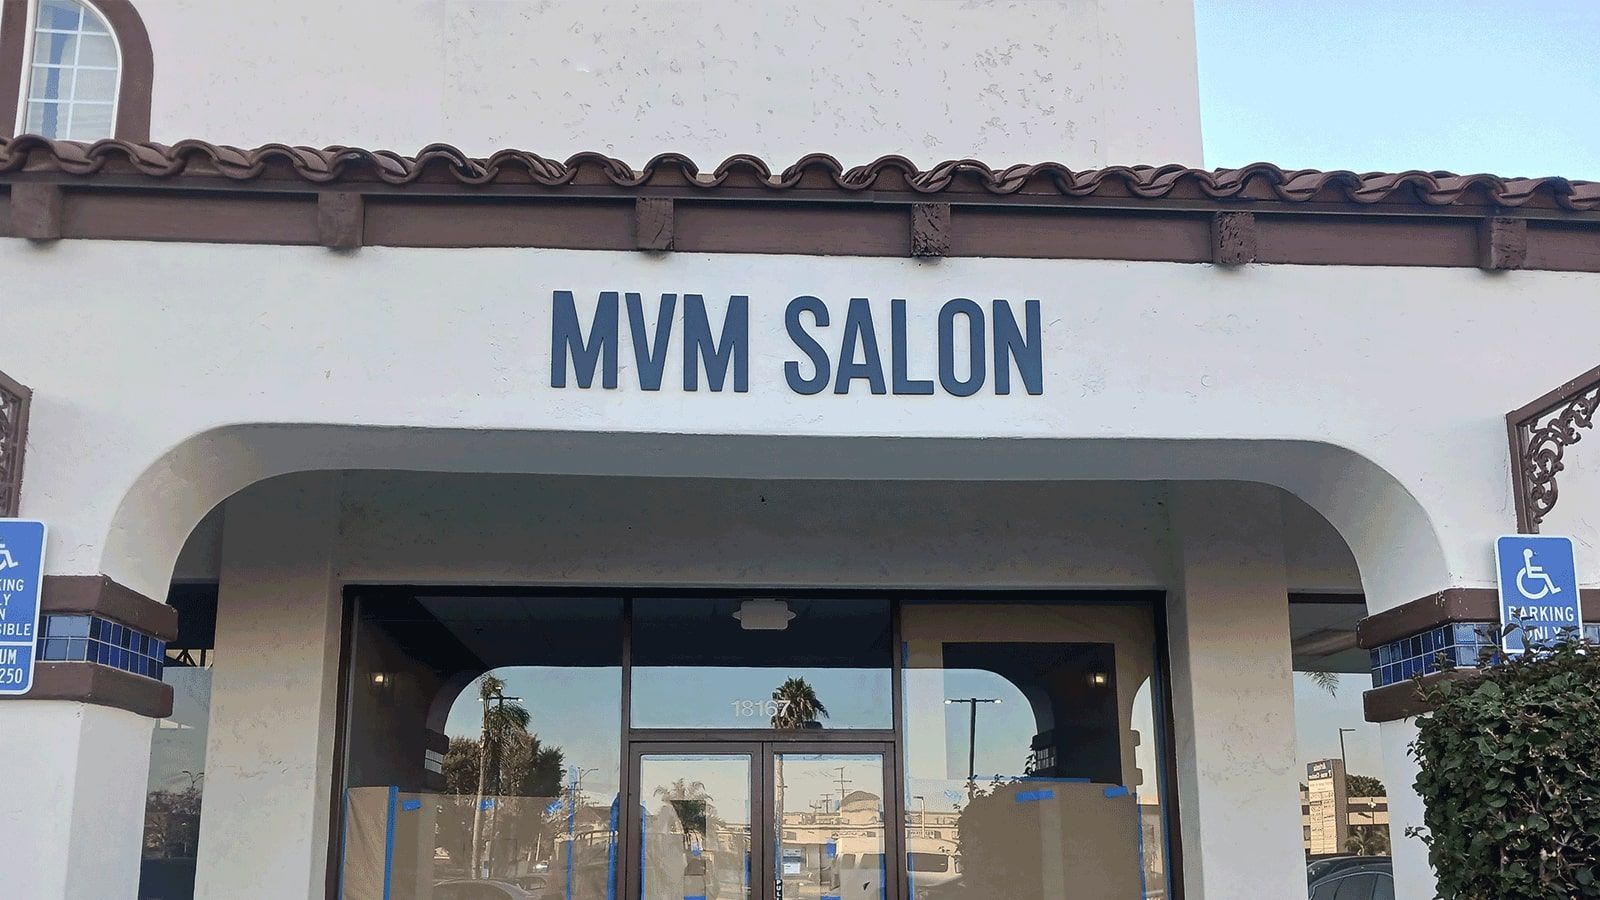 MVM Salon outdoor sign attached to the facade